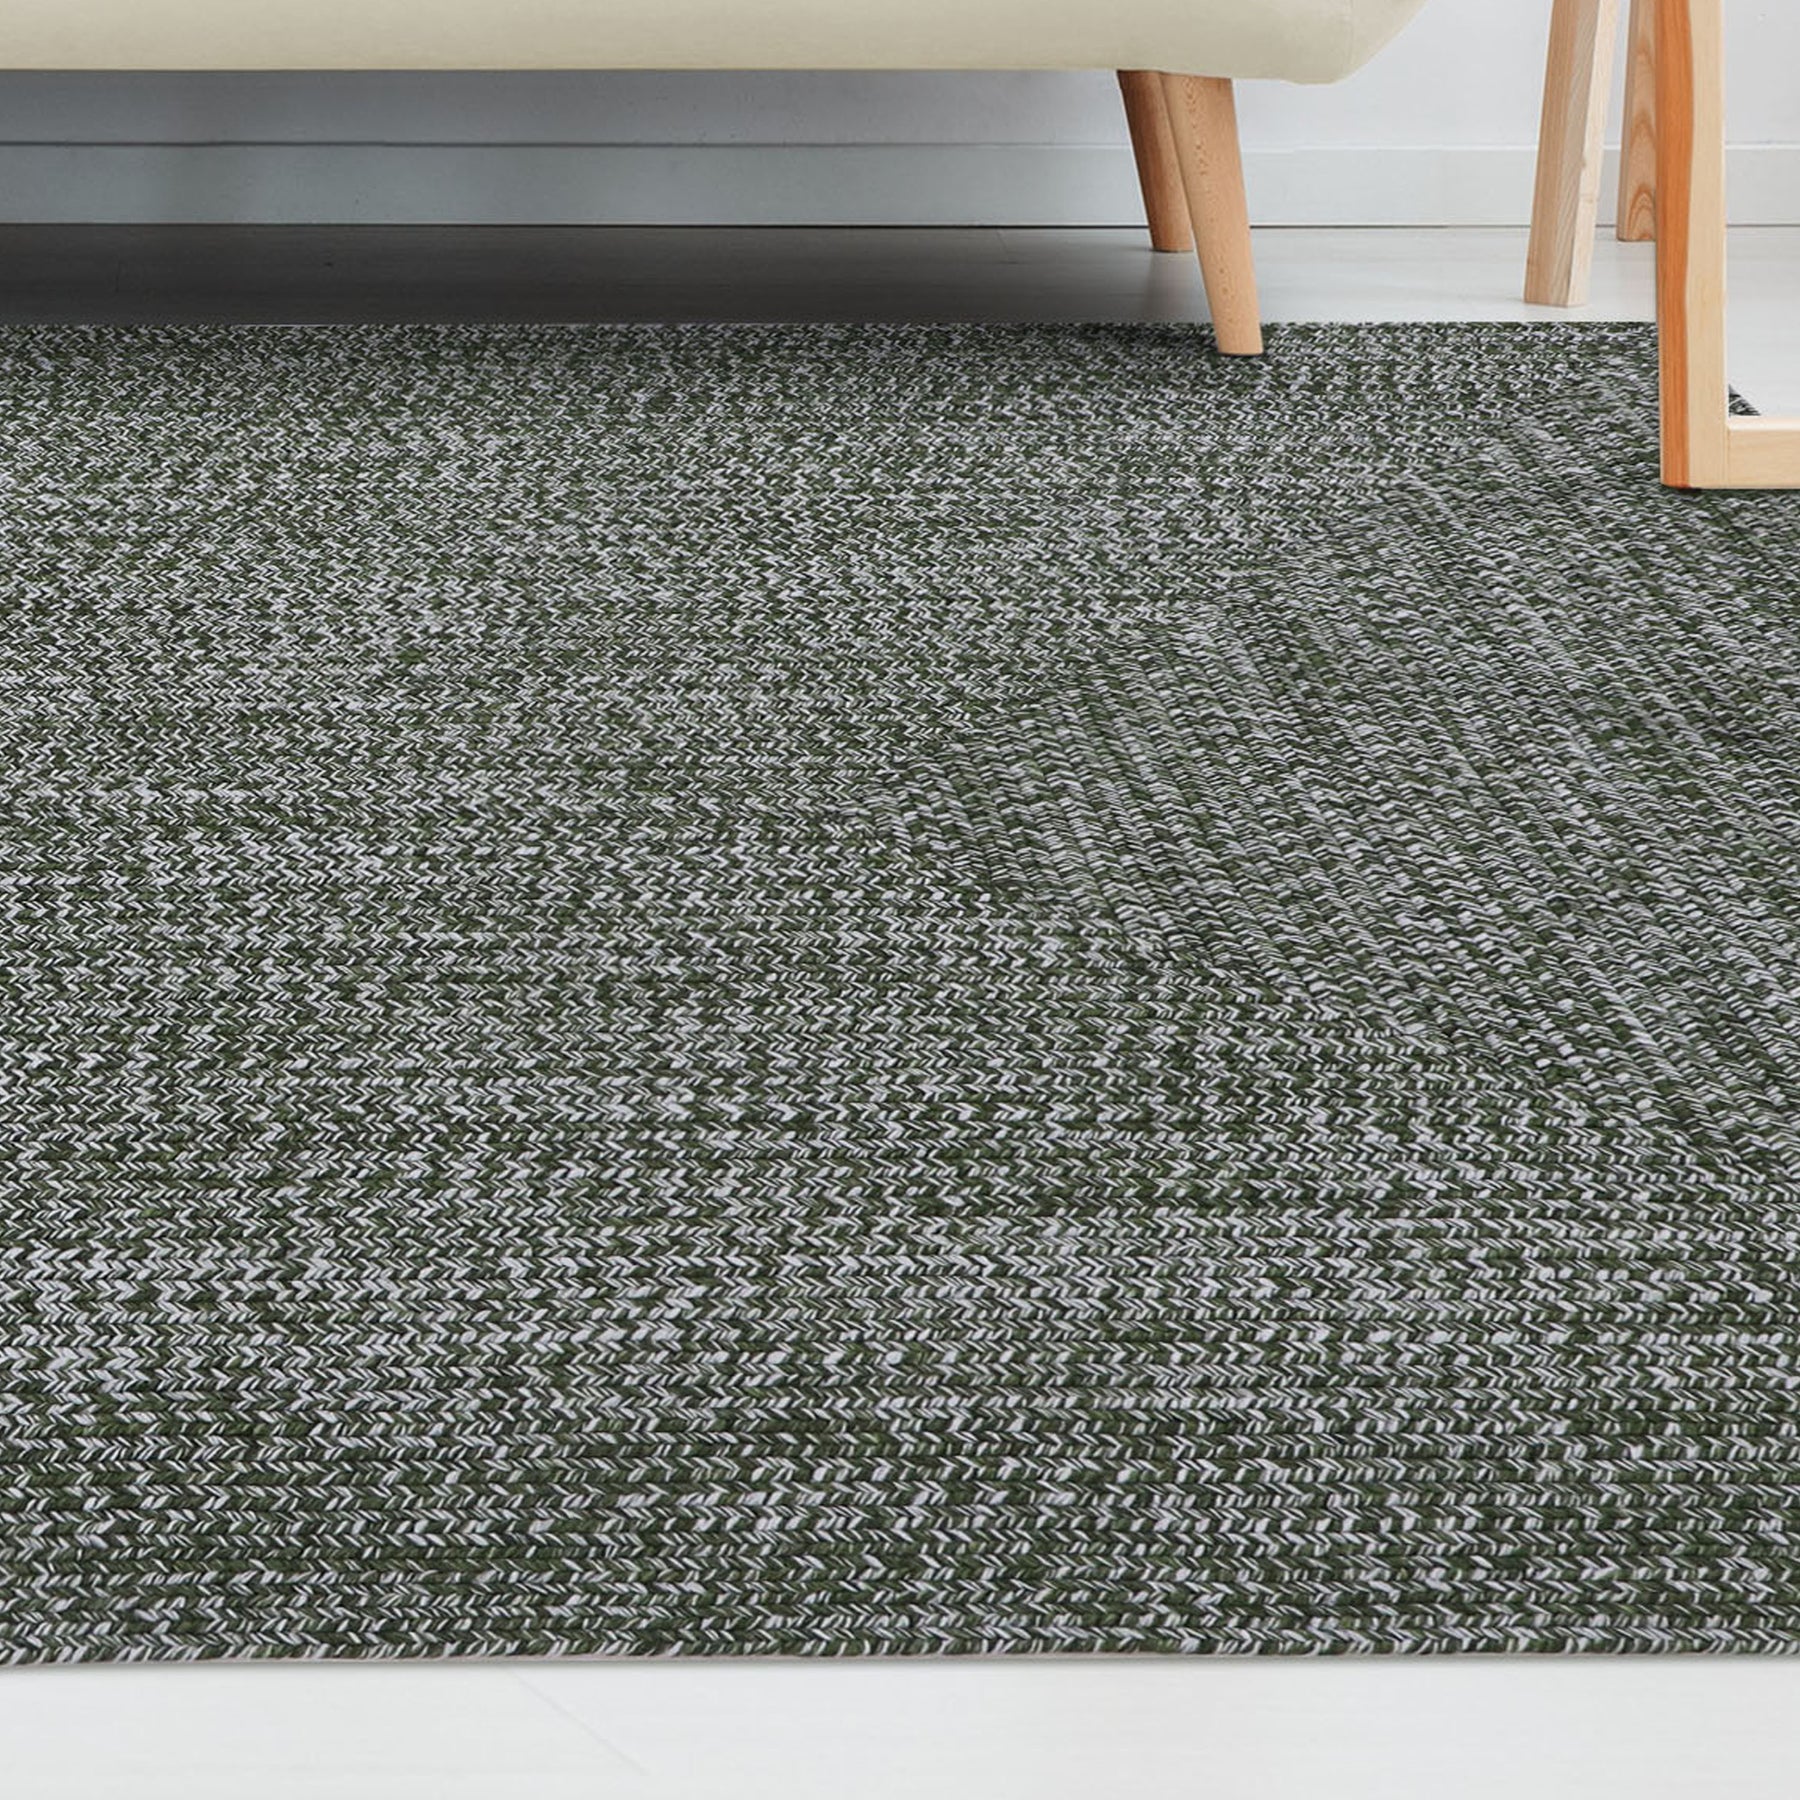 Superior Bohemian Multi-Toned Braided Patterned Indoor Outdoor Area Rug